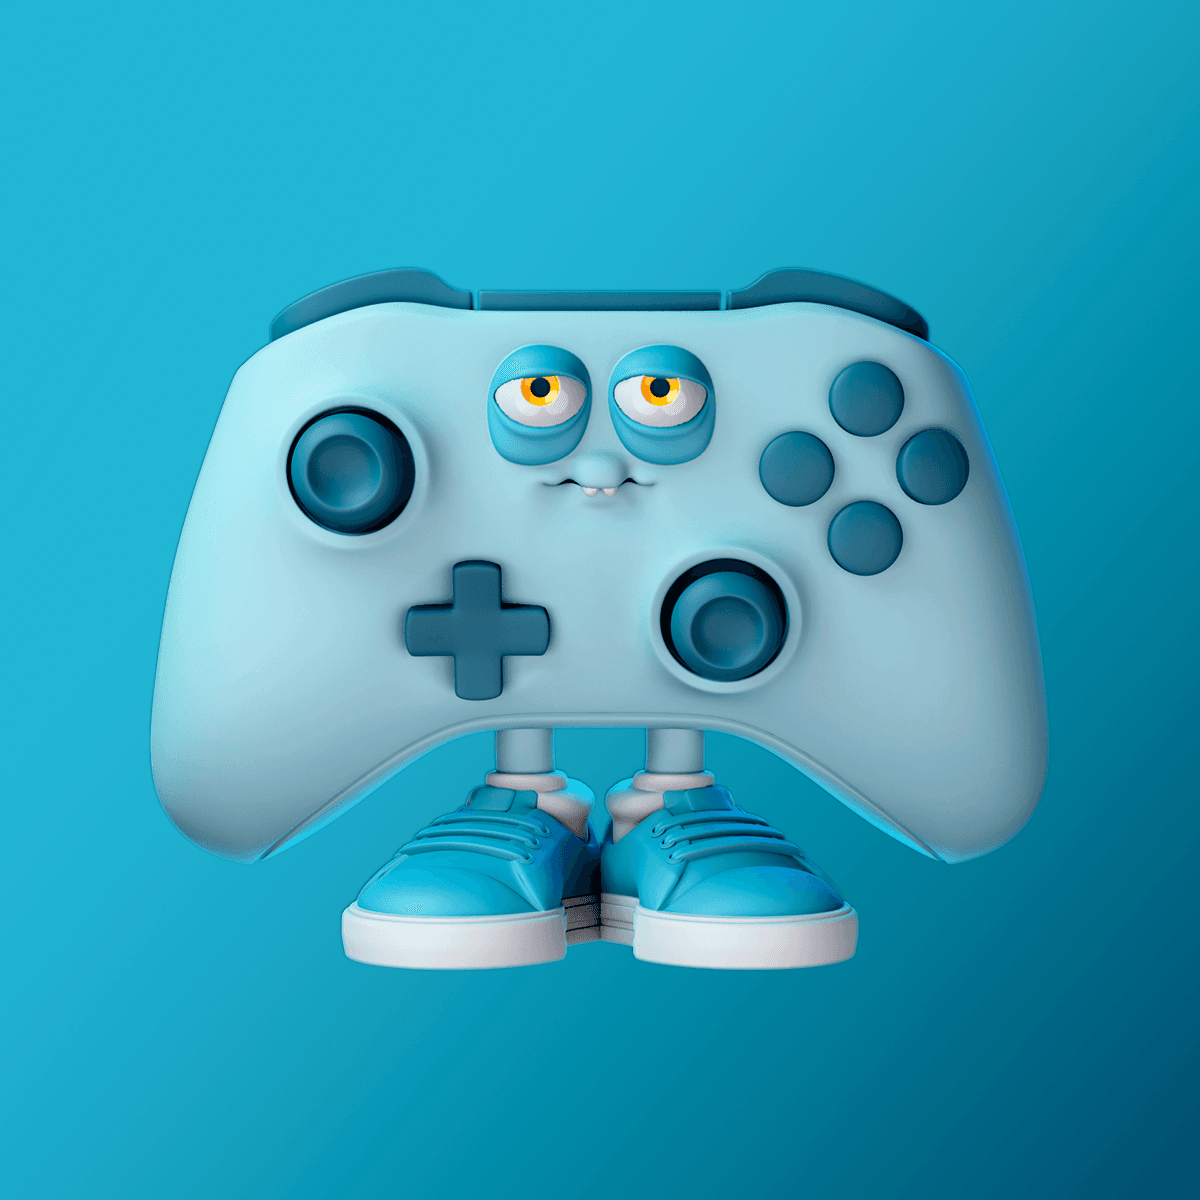 "Boxy" the Xbox Controller 3d model